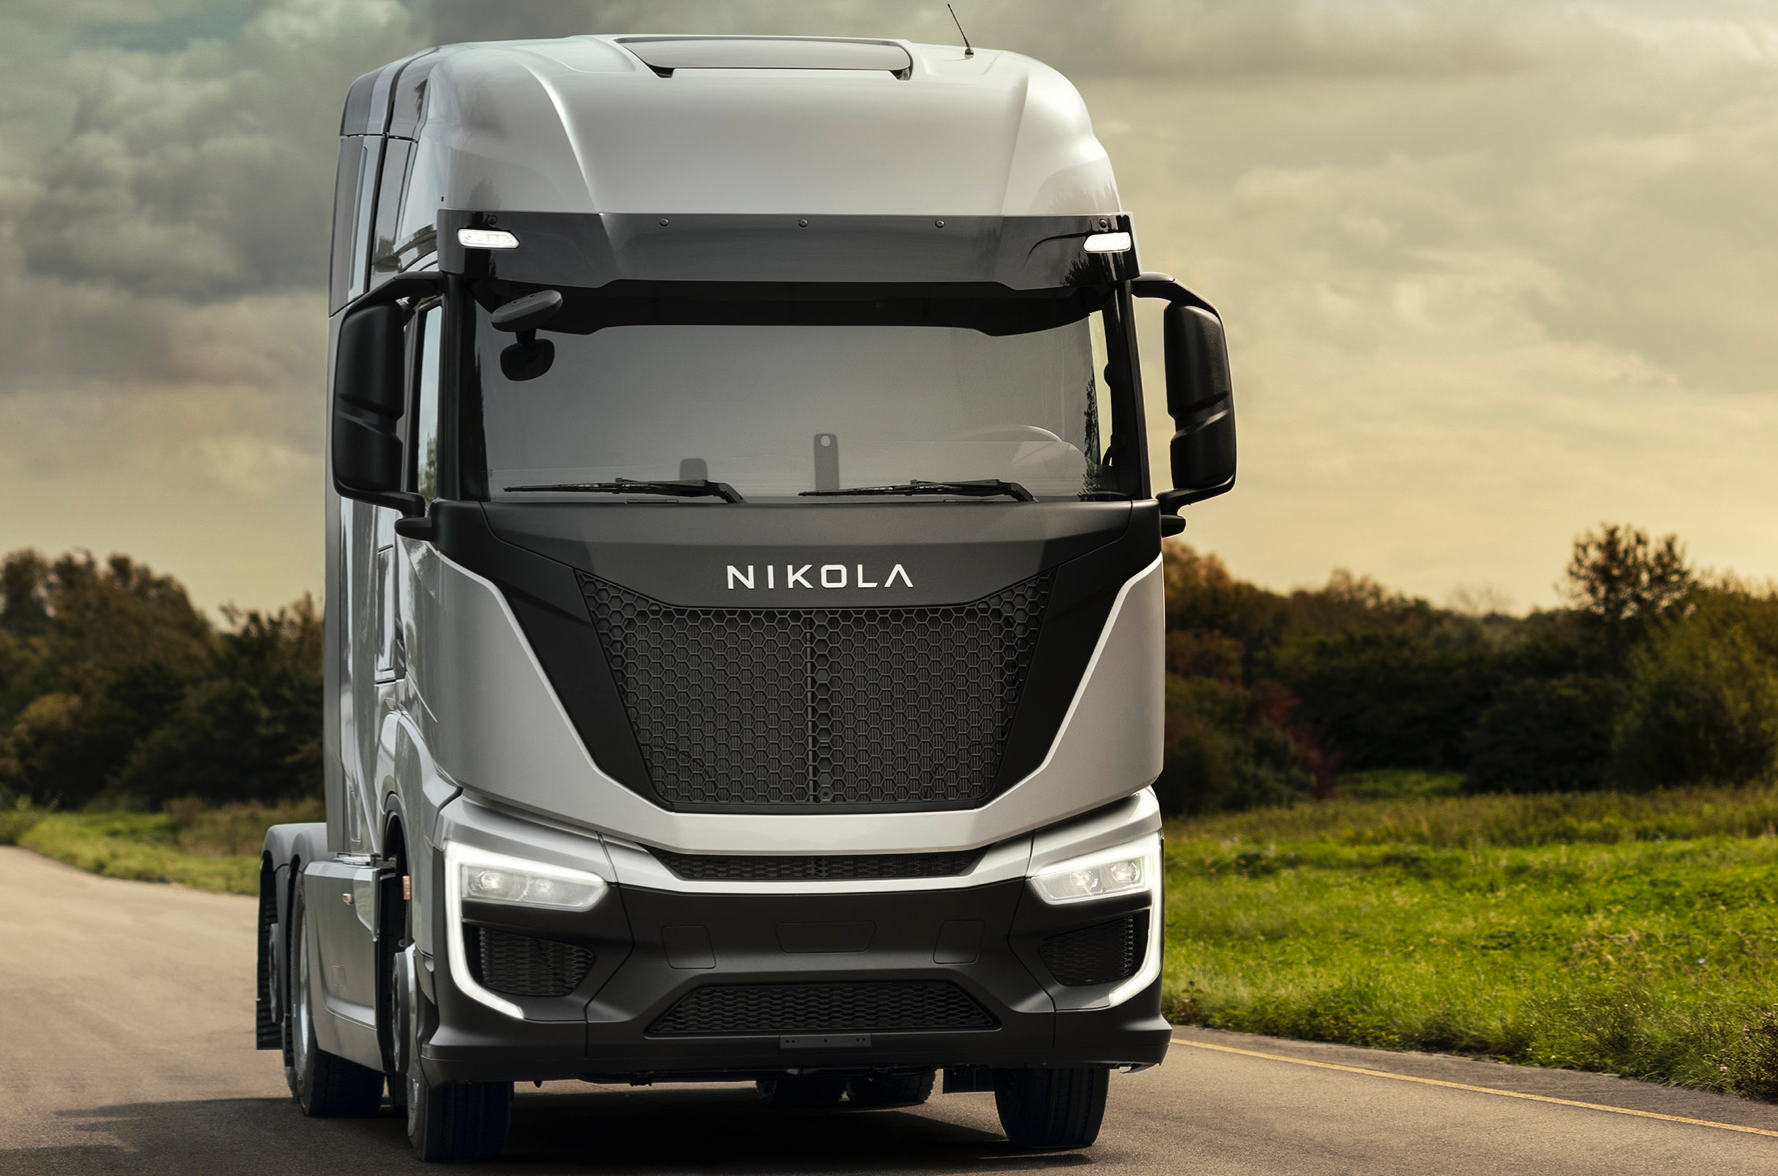 GP JOULE to Order 100 Nikola Tre Fuel Cell Electric Vehicles